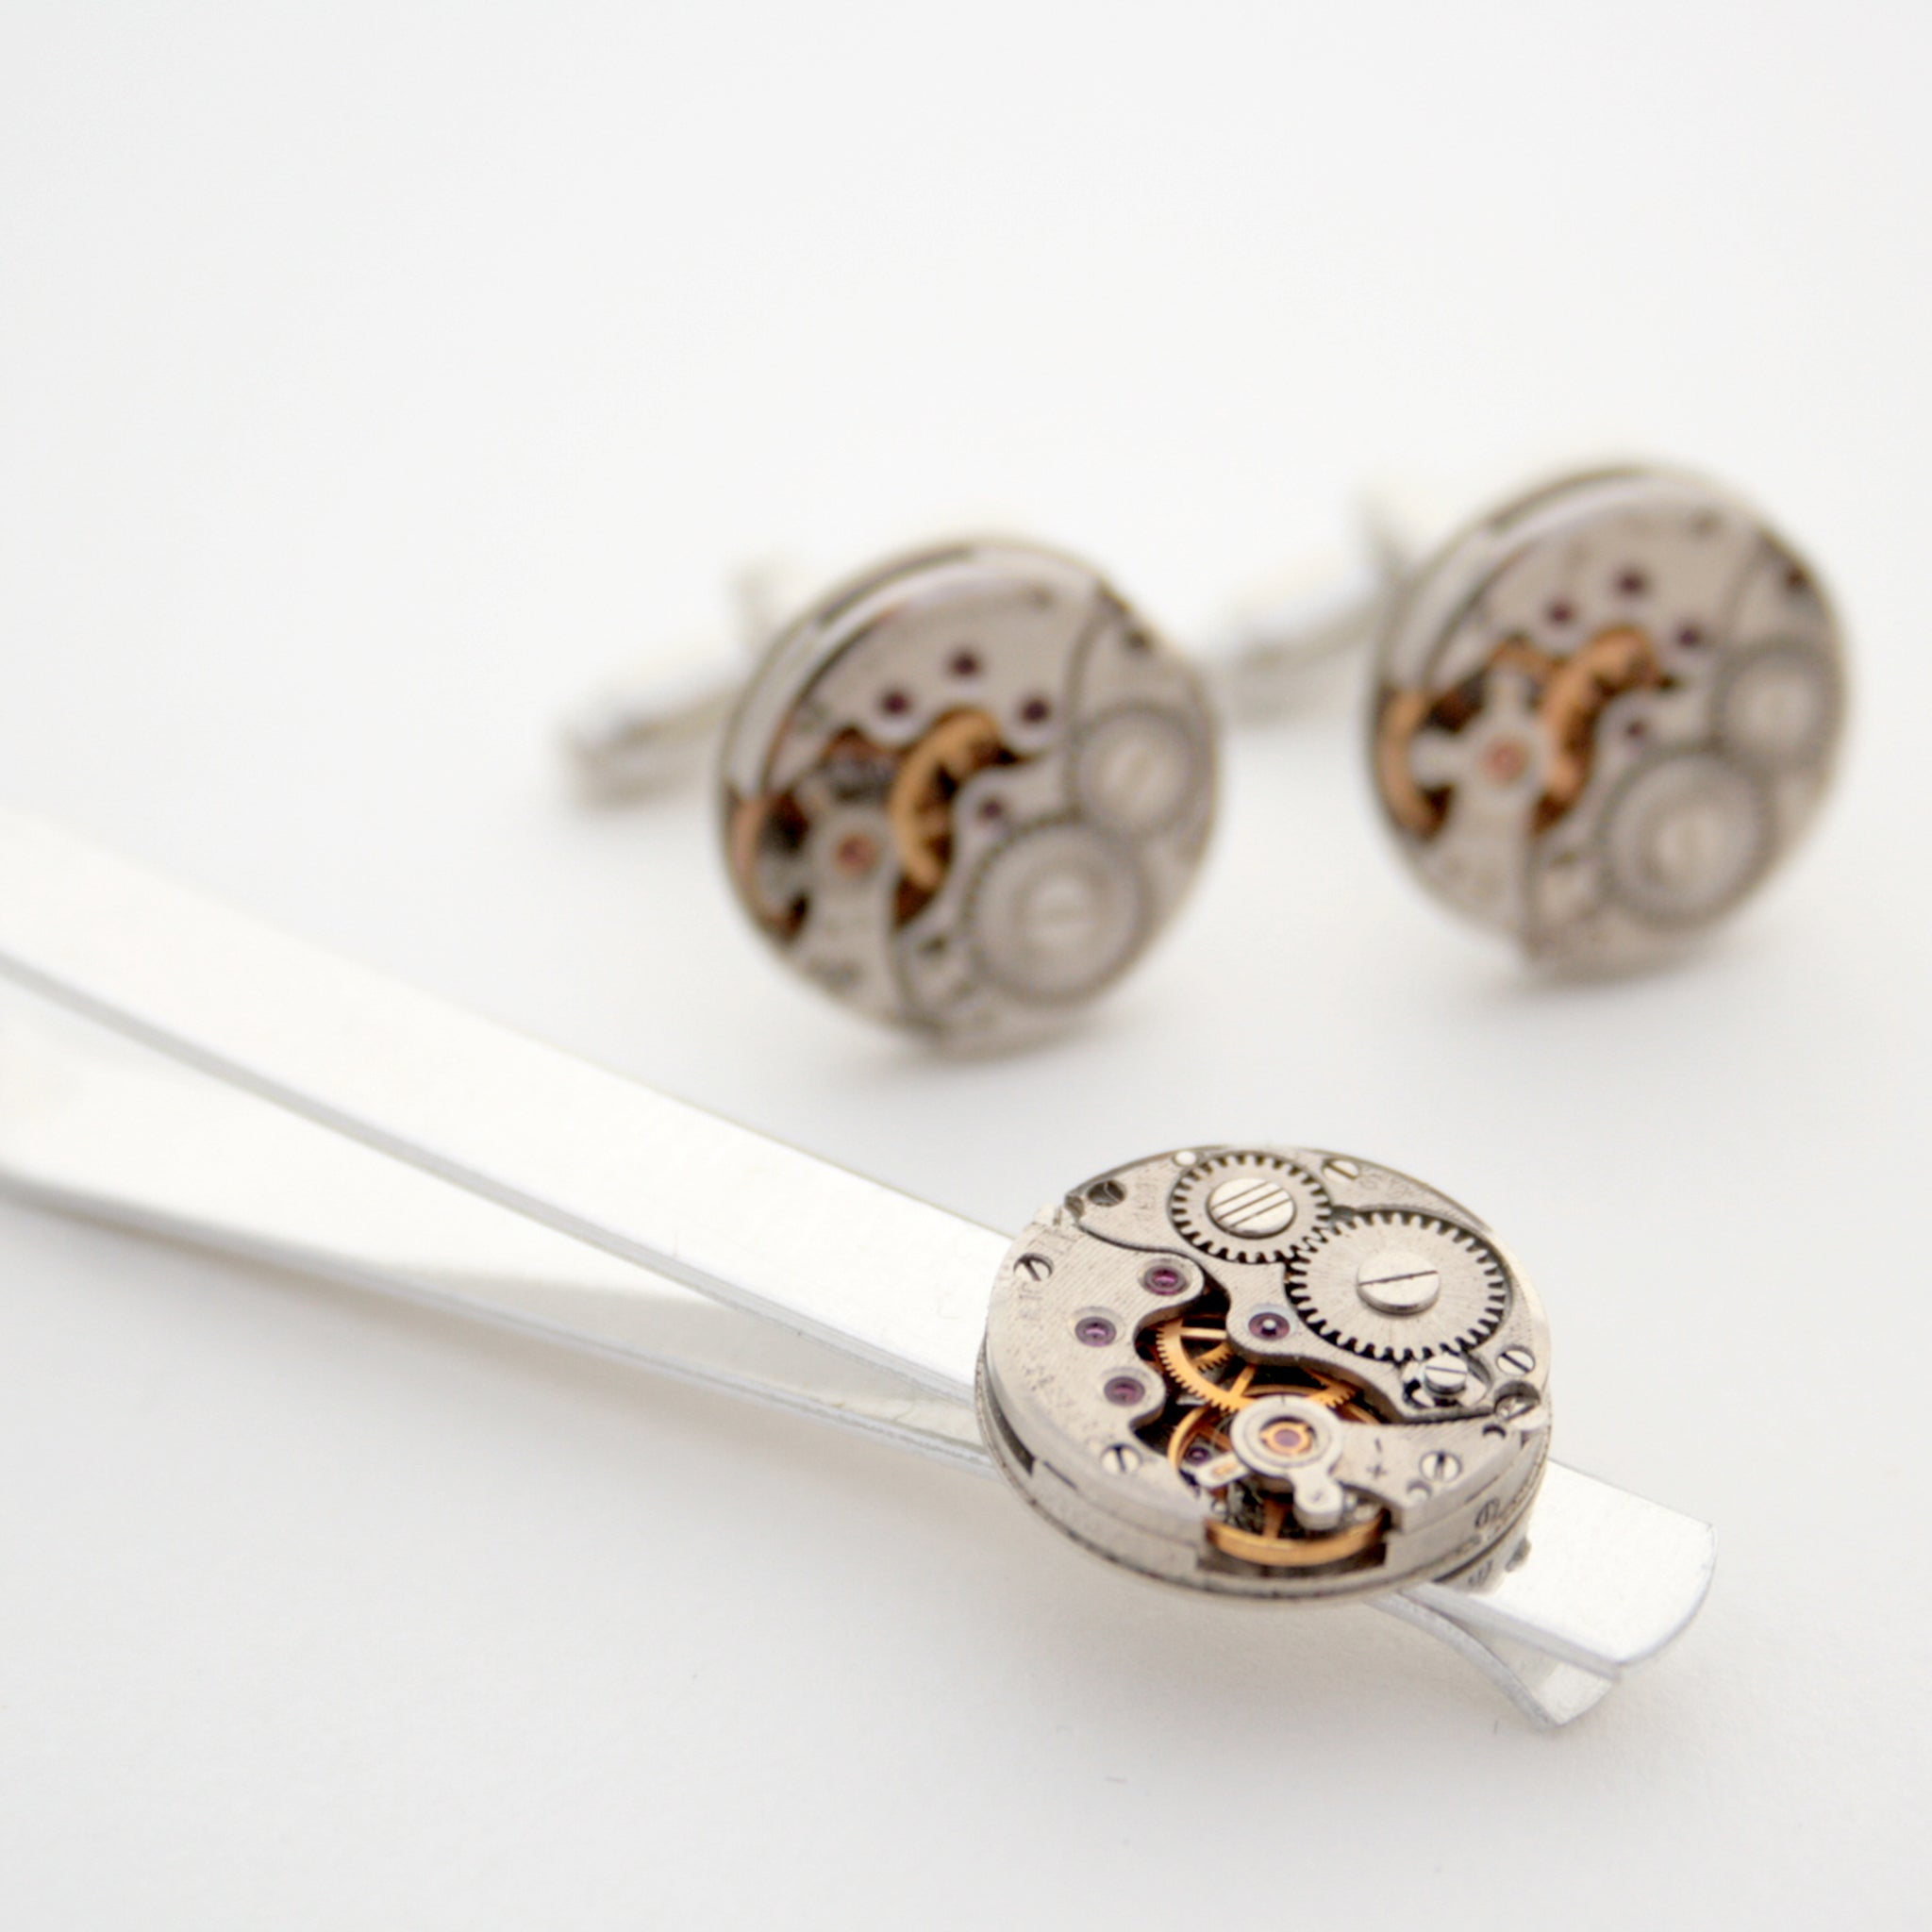 Tie Clip and Cufflinks with Steampunk Watch Movements